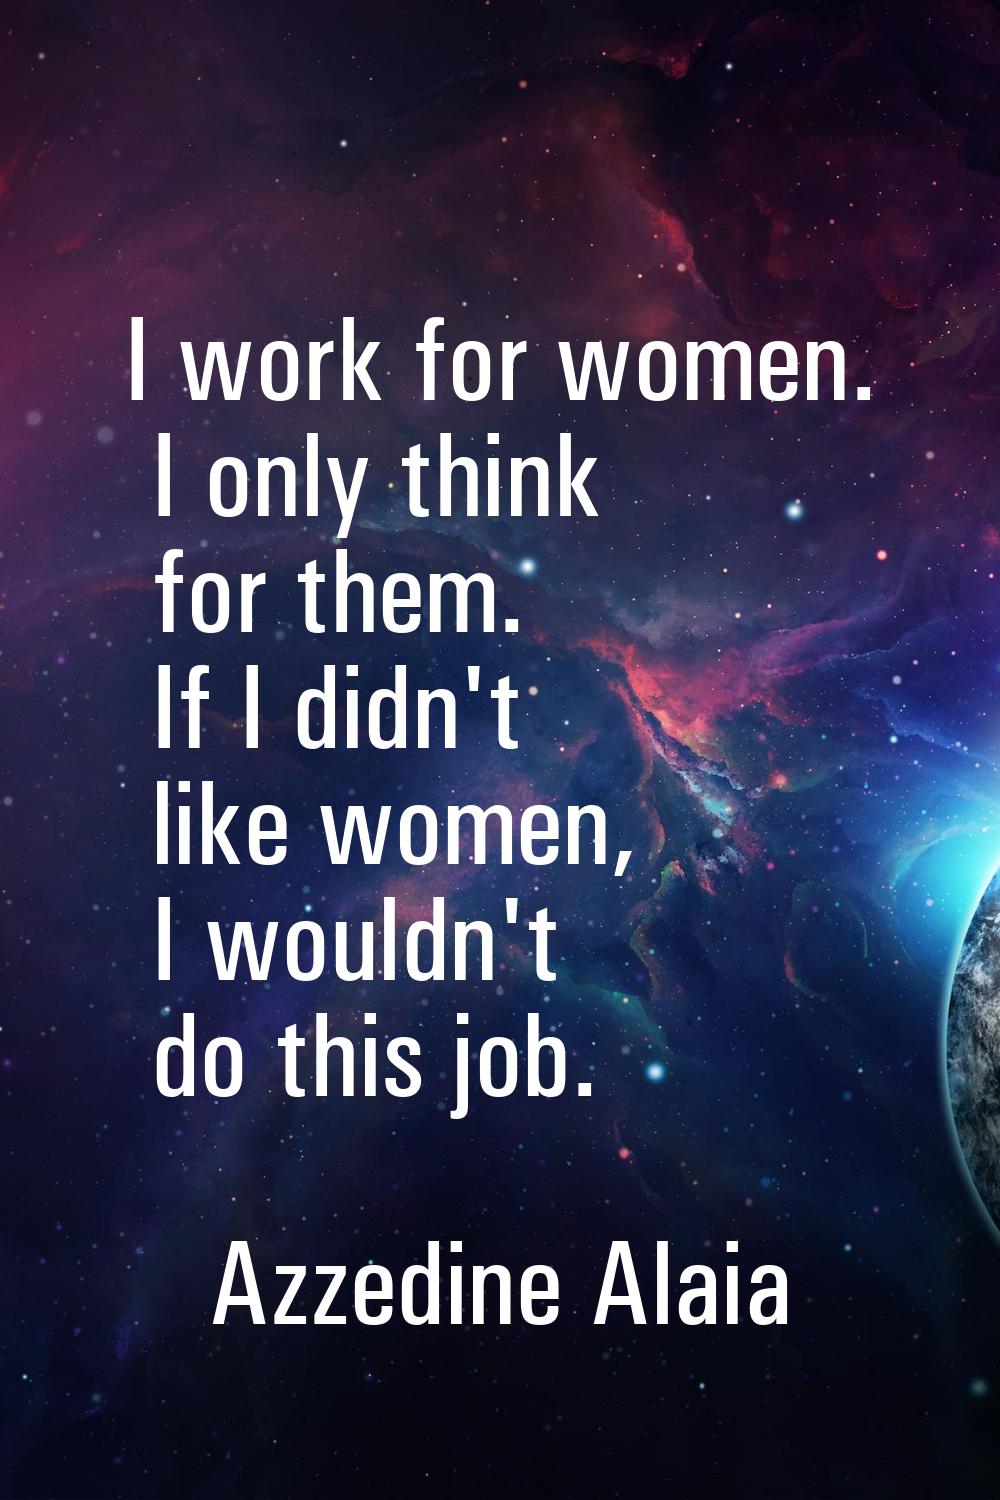 I work for women. I only think for them. If I didn't like women, I wouldn't do this job.